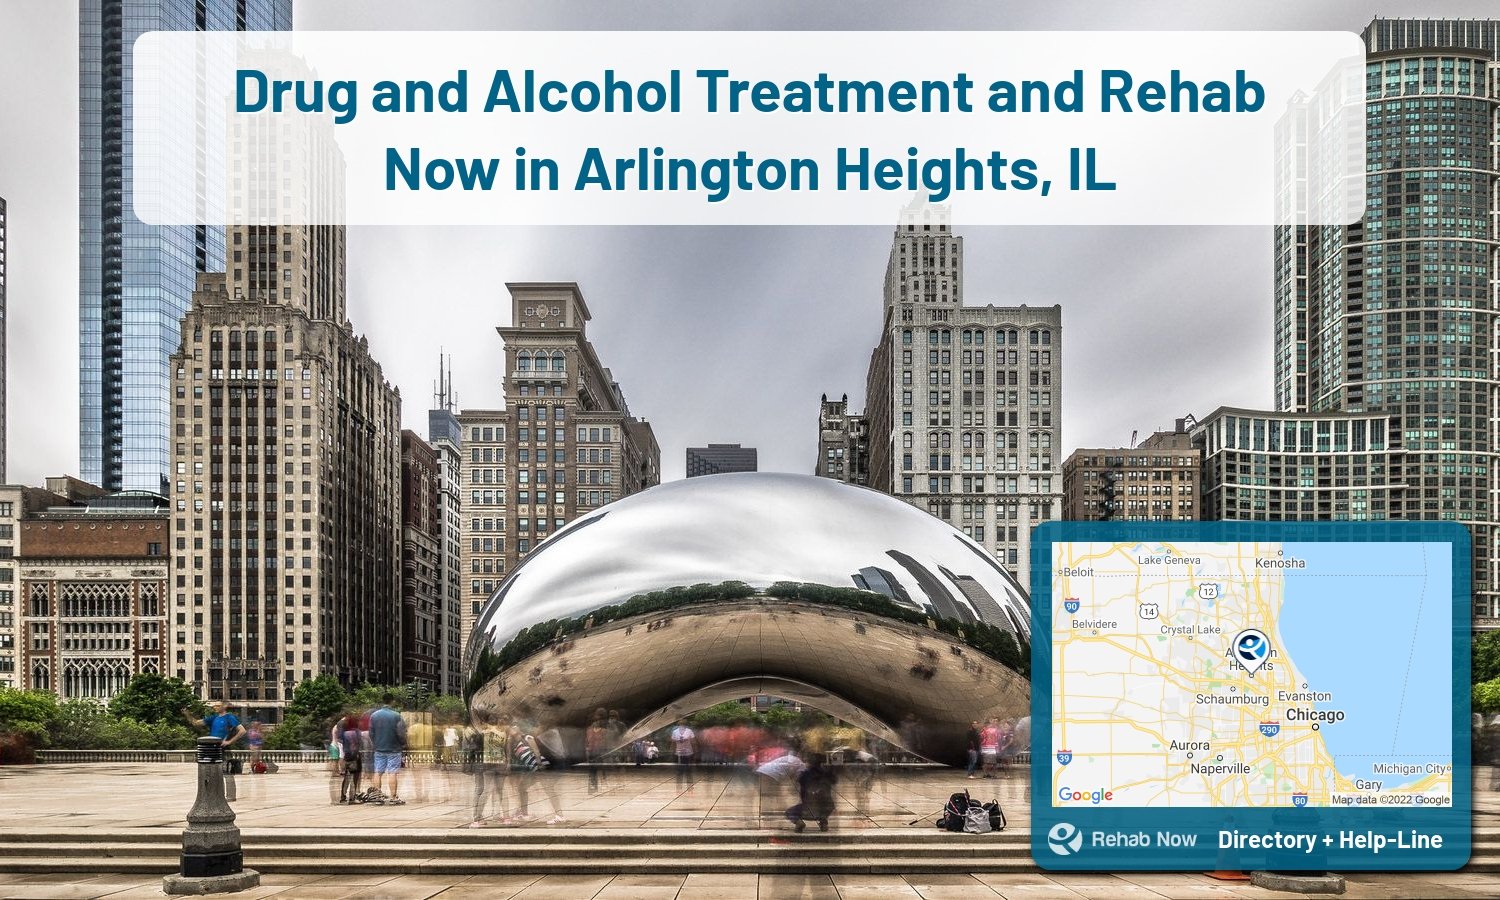 Our experts can help you find treatment now in Arlington Heights, Illinois. We list drug rehab and alcohol centers in Illinois.